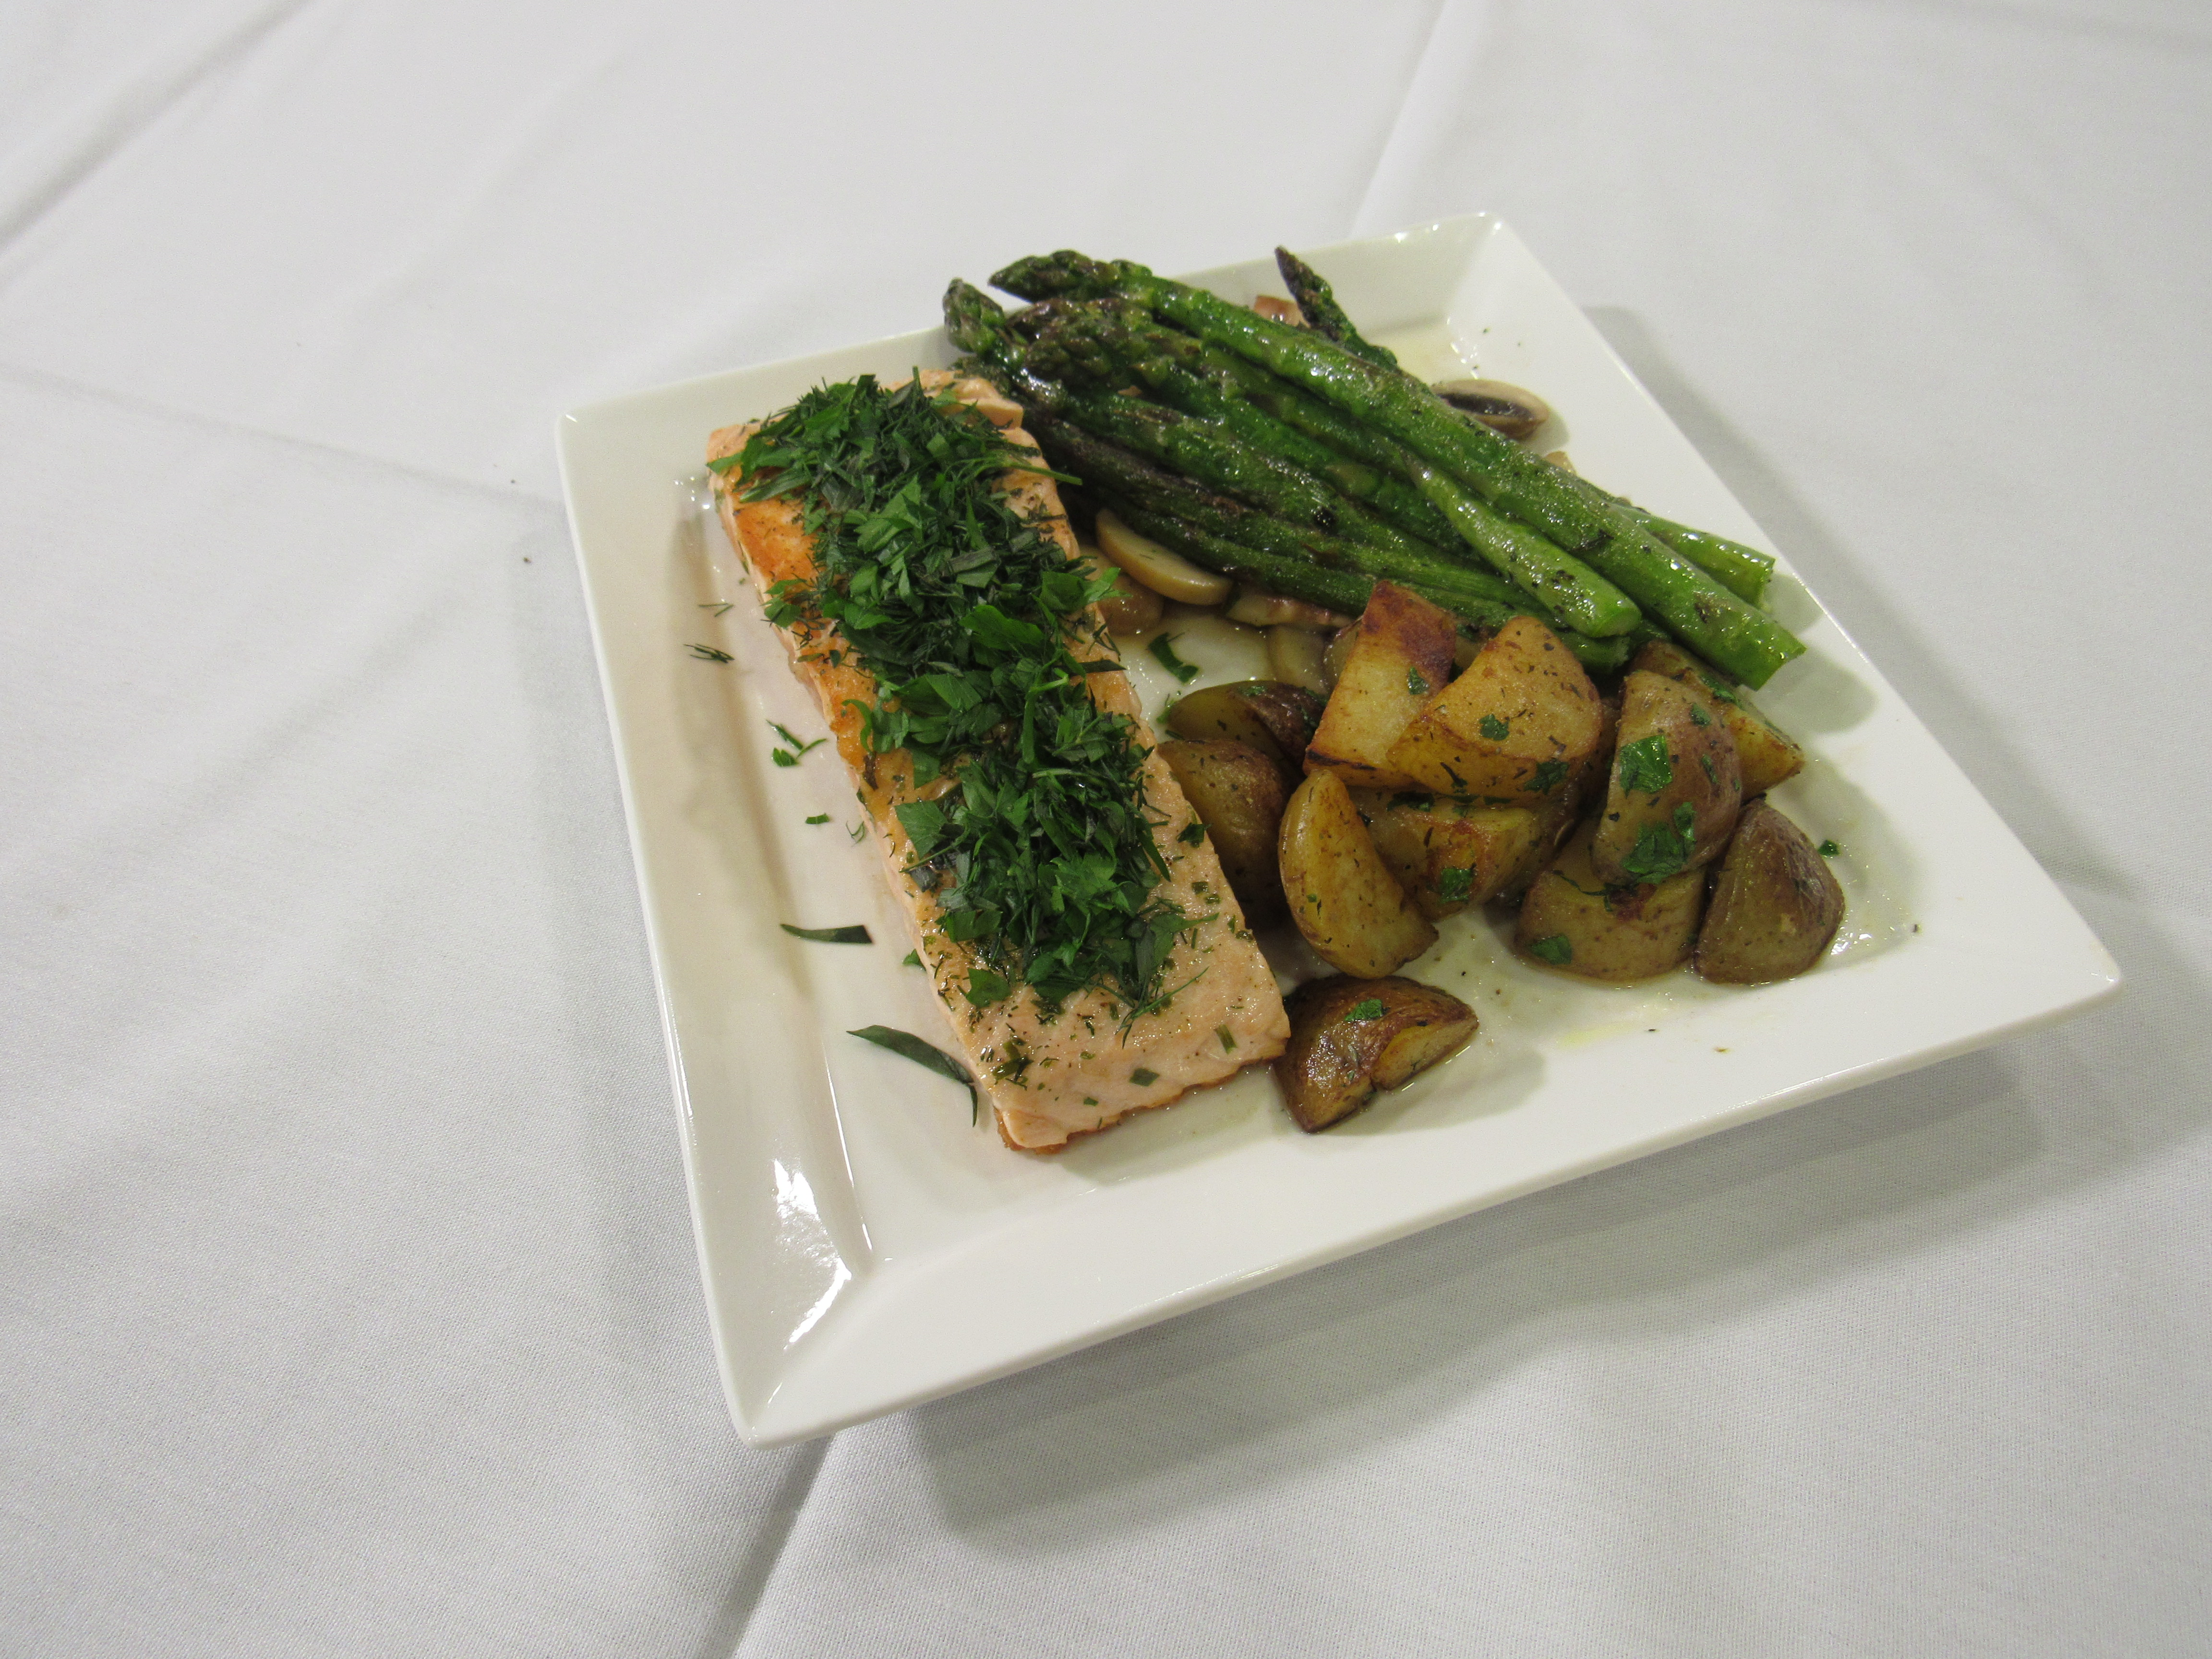 salmon fillet with herbs pic